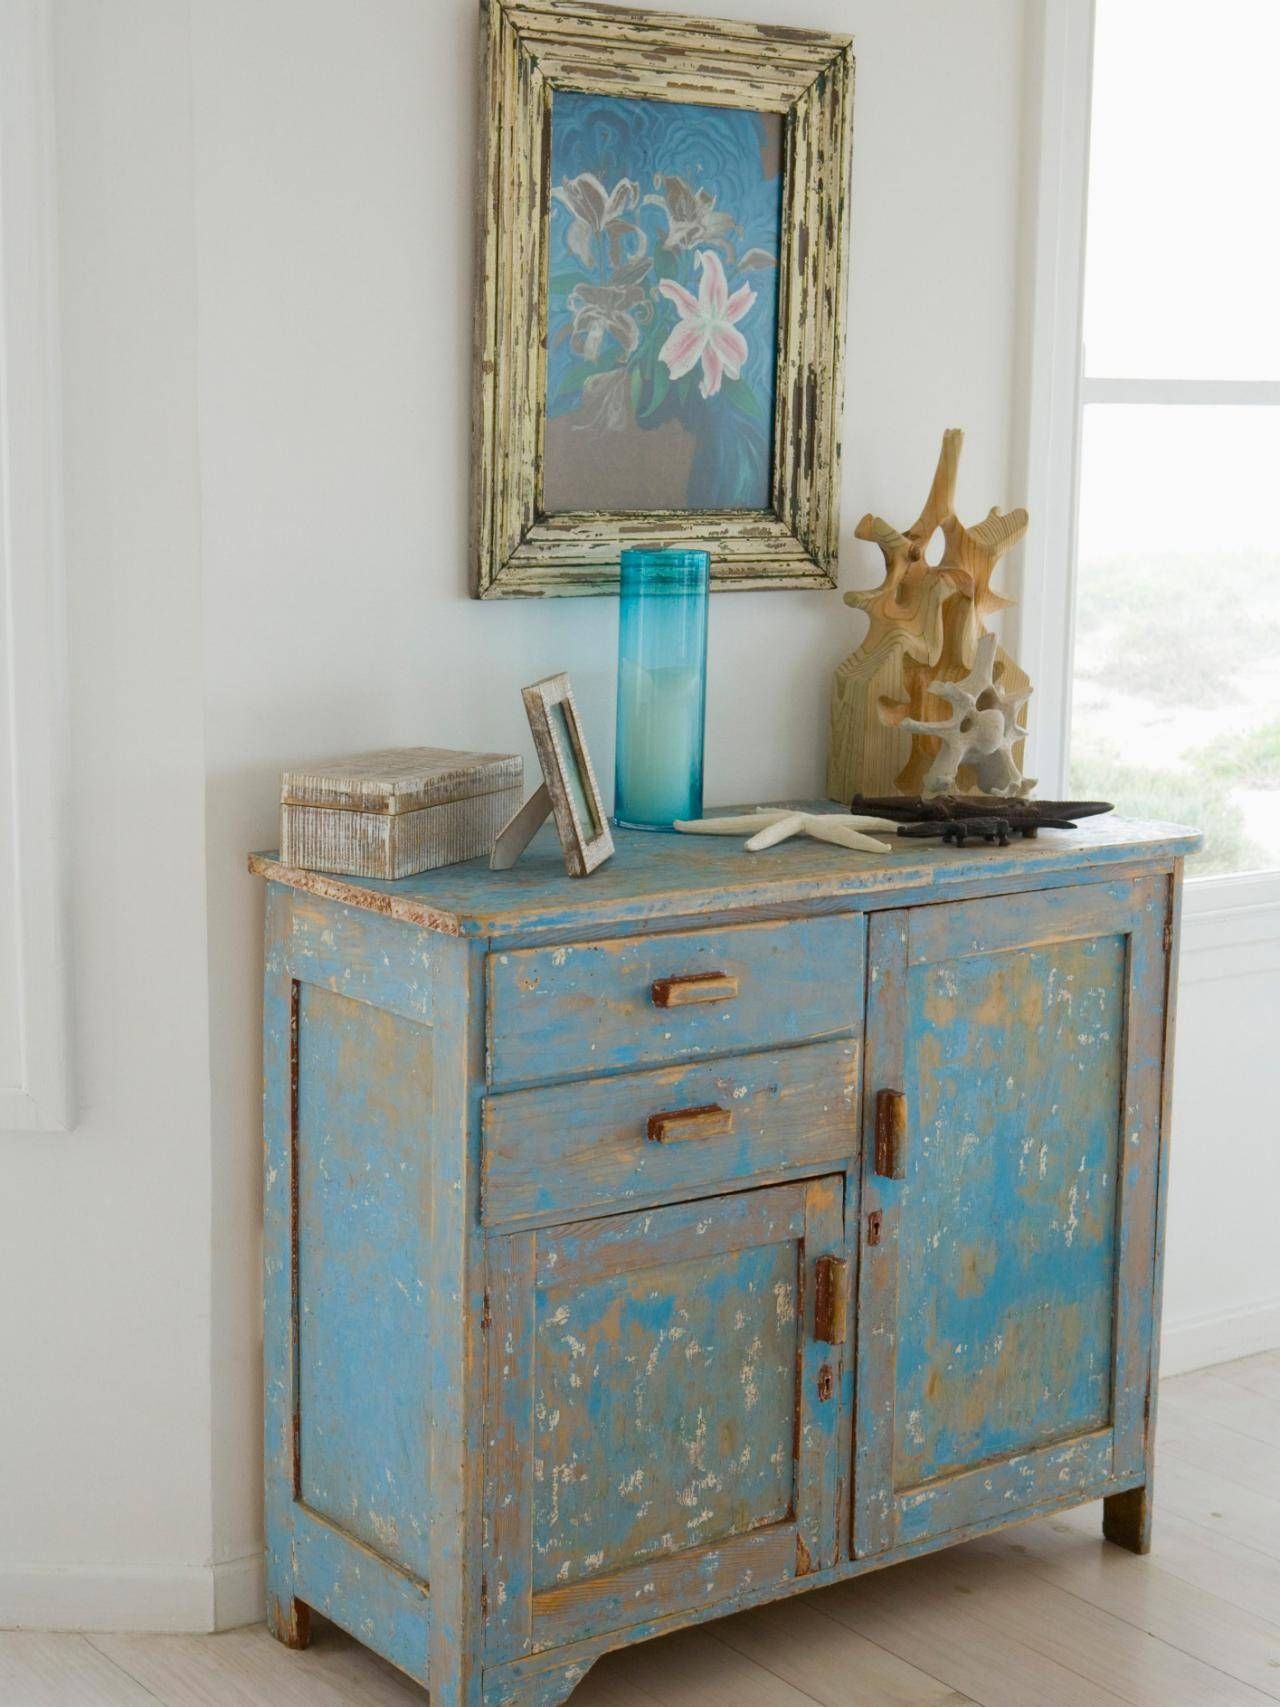 How To Distress Furniture | Hgtv Regarding White Distressed Finish Sideboards (View 7 of 15)